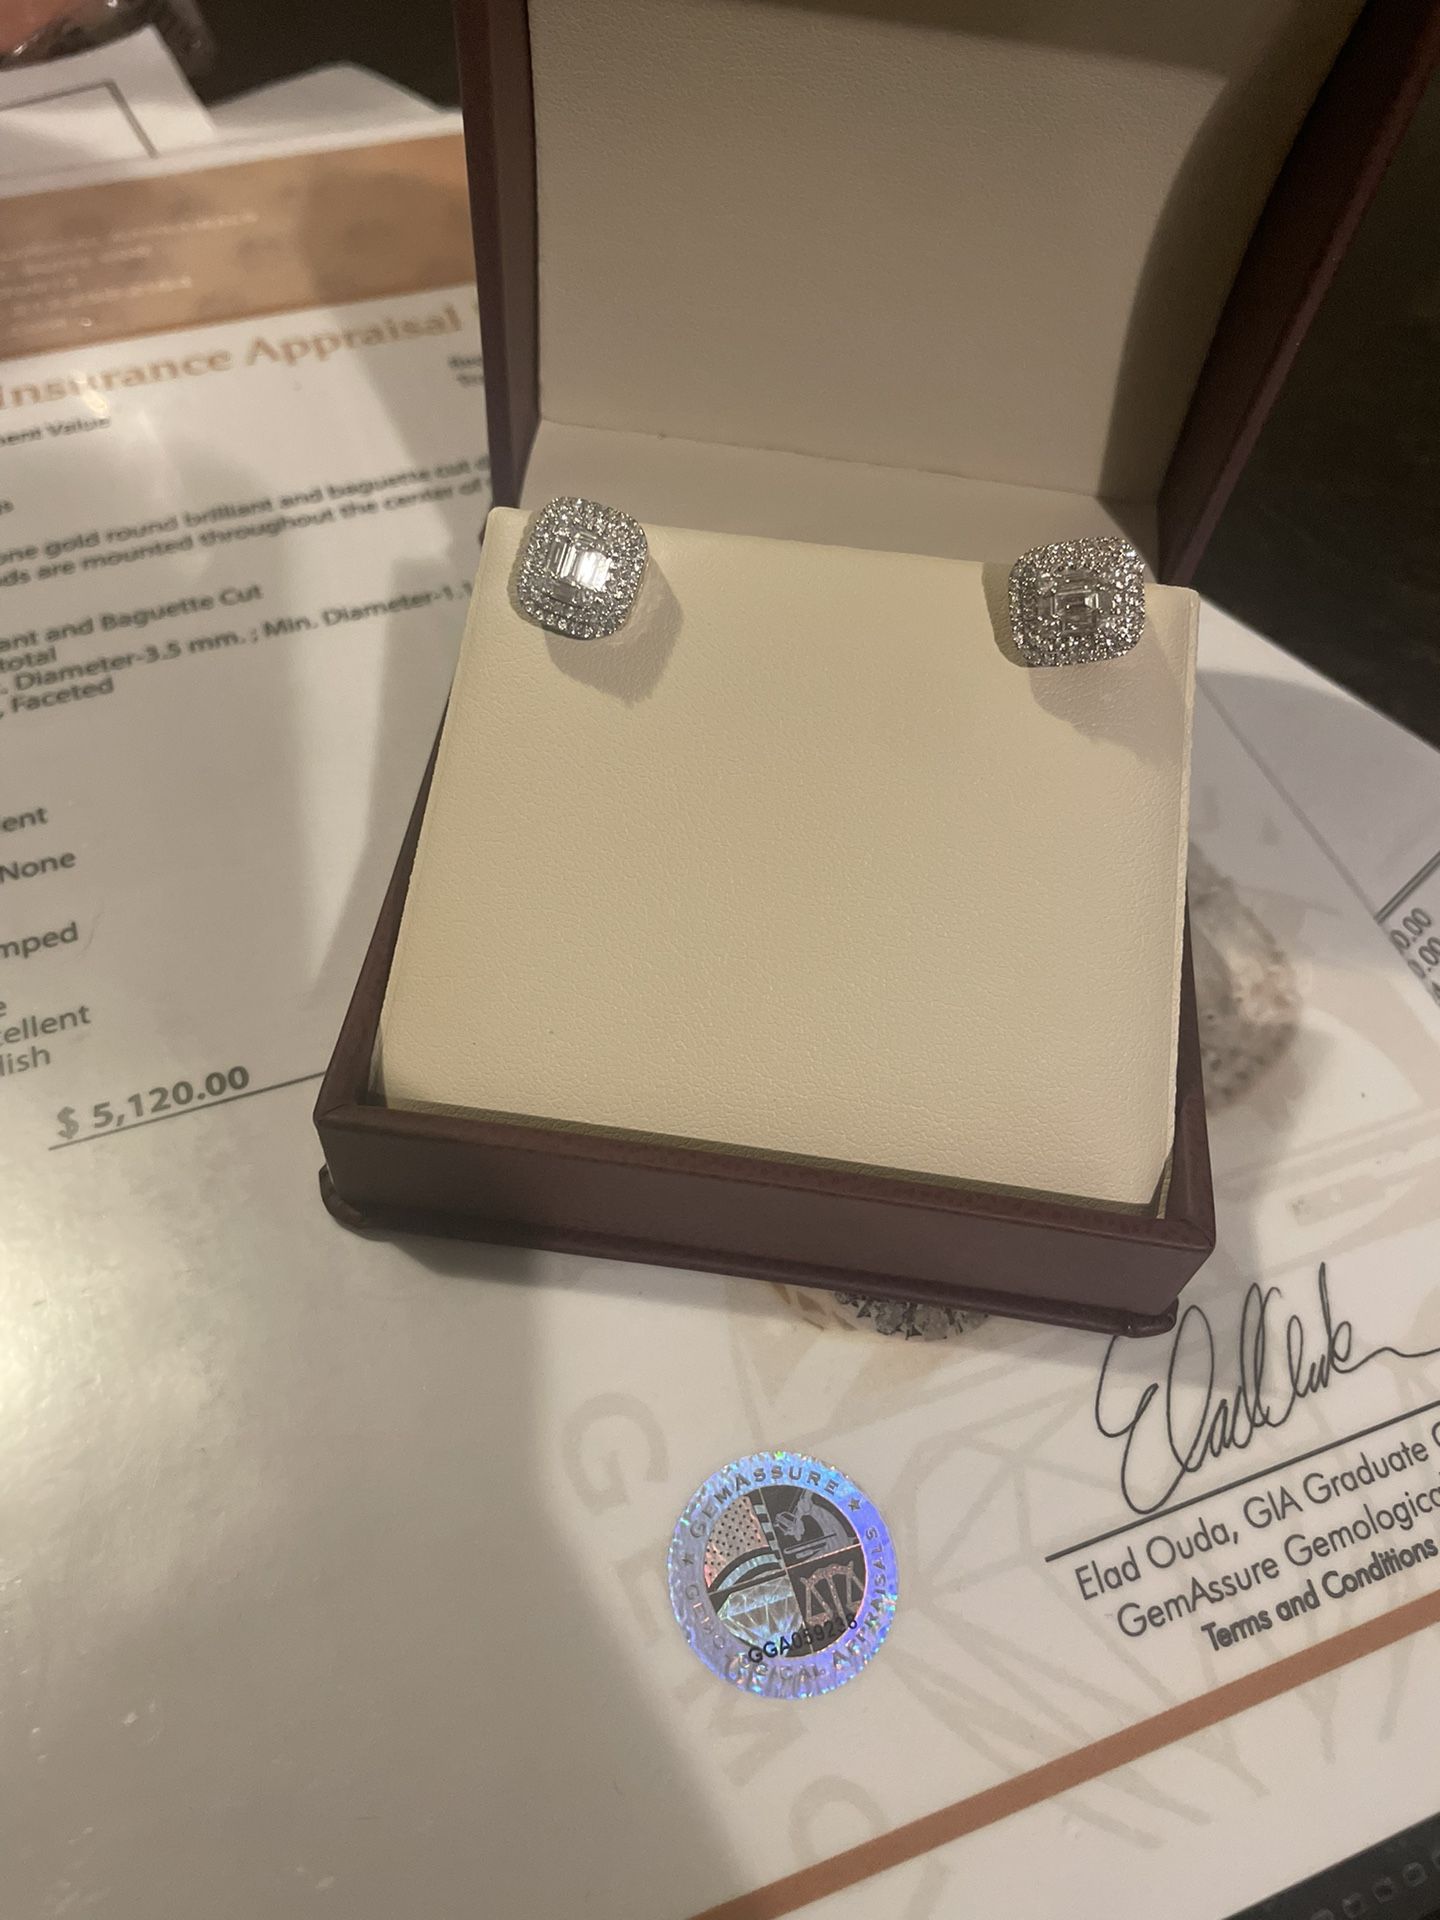 10k Gold SL1 Diamond Earrings (Authentic With Papers)